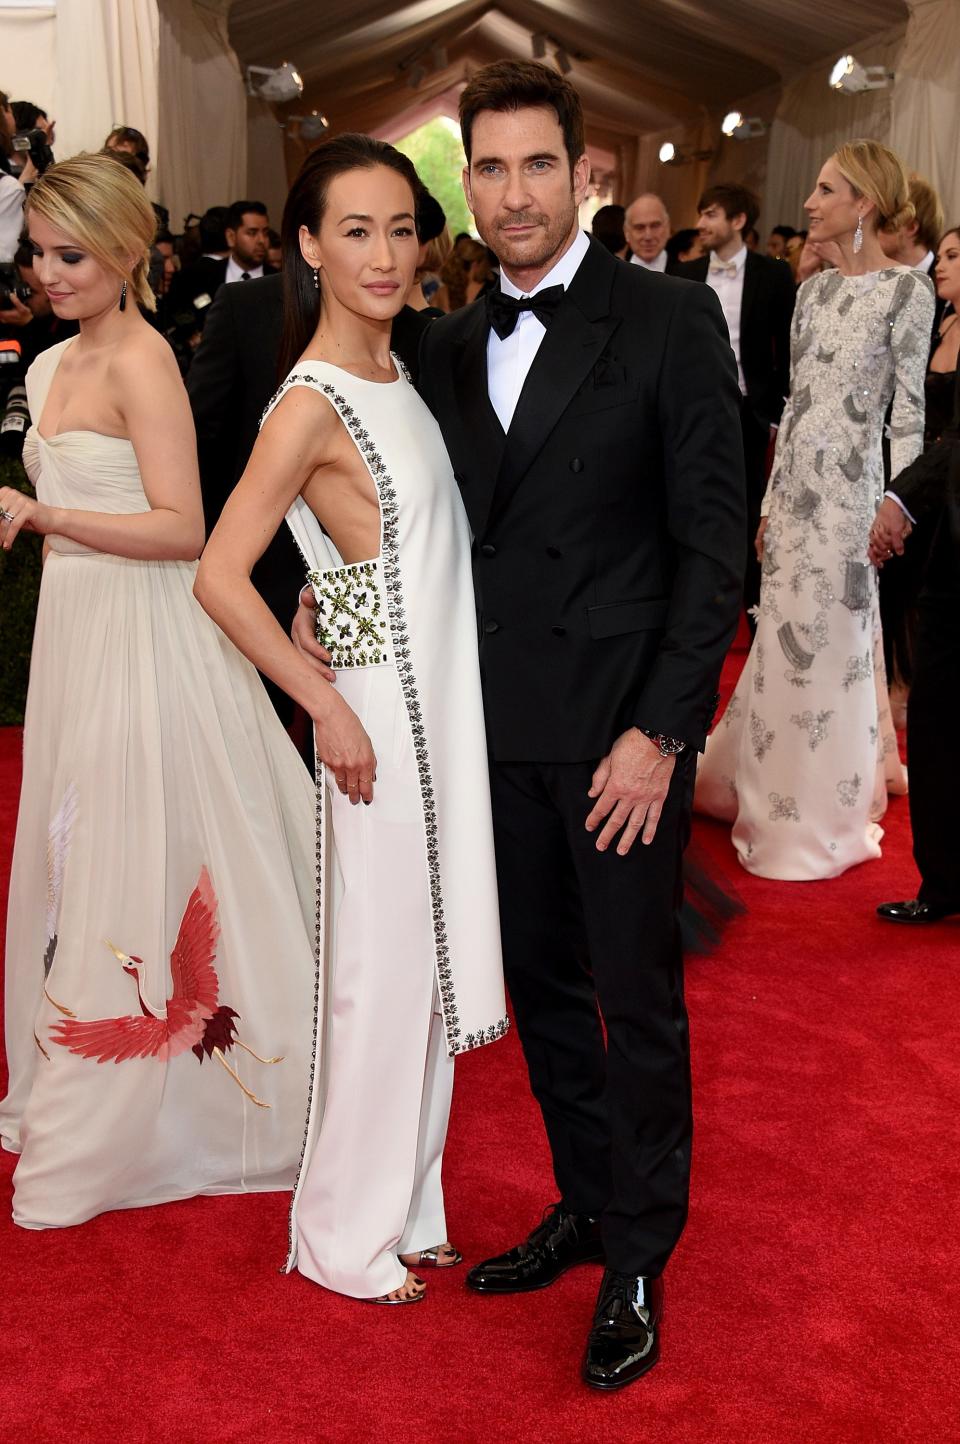 <h1 class="title">Maggie Q in Tory Burch and Dylan McDermott</h1><cite class="credit">Photo: Getty Images</cite>